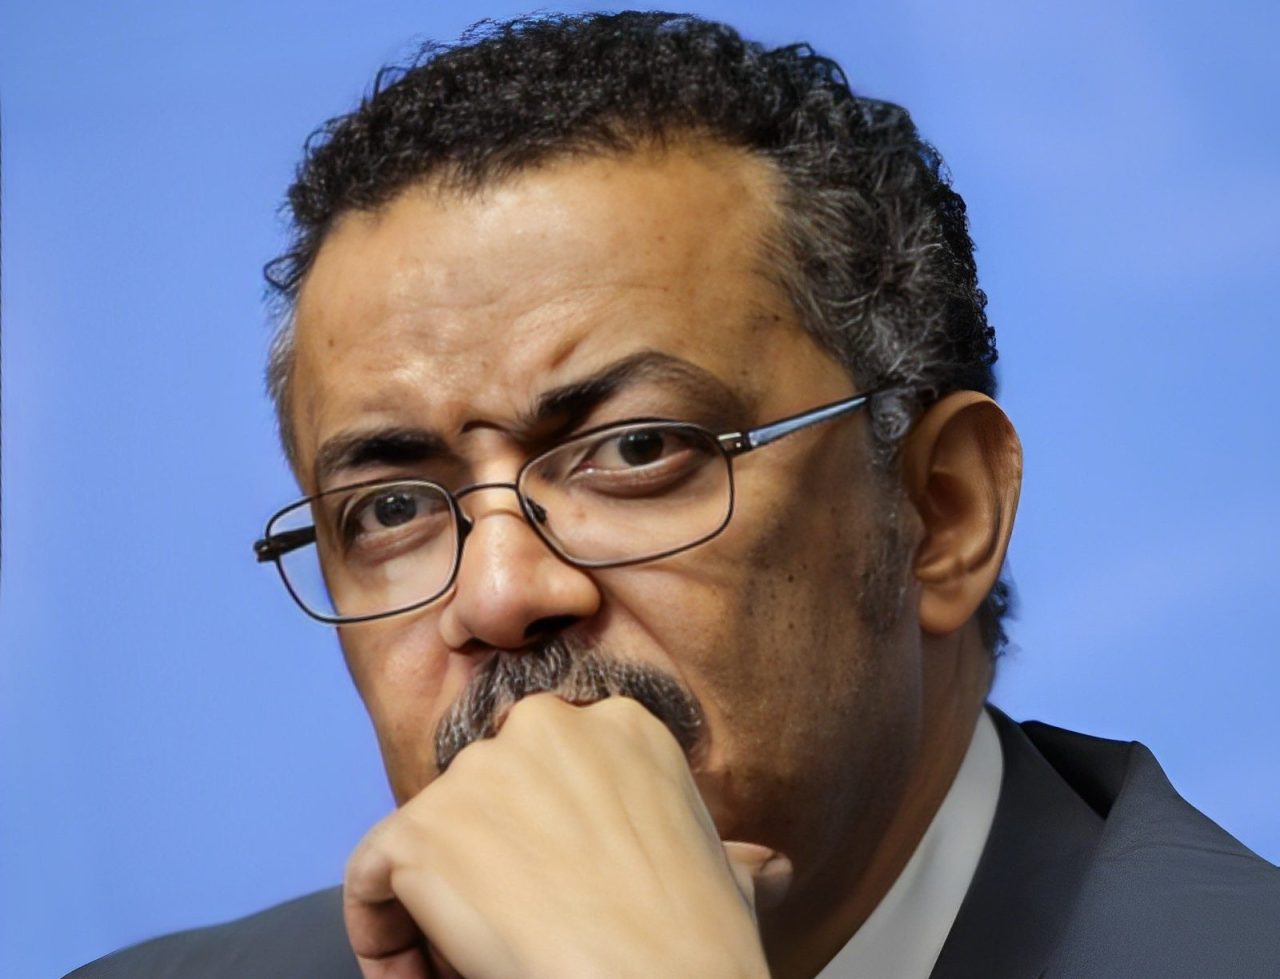 Tedros Adhanom Ghebreyesus: Female scientists have contributed enormously to global public health and medicine